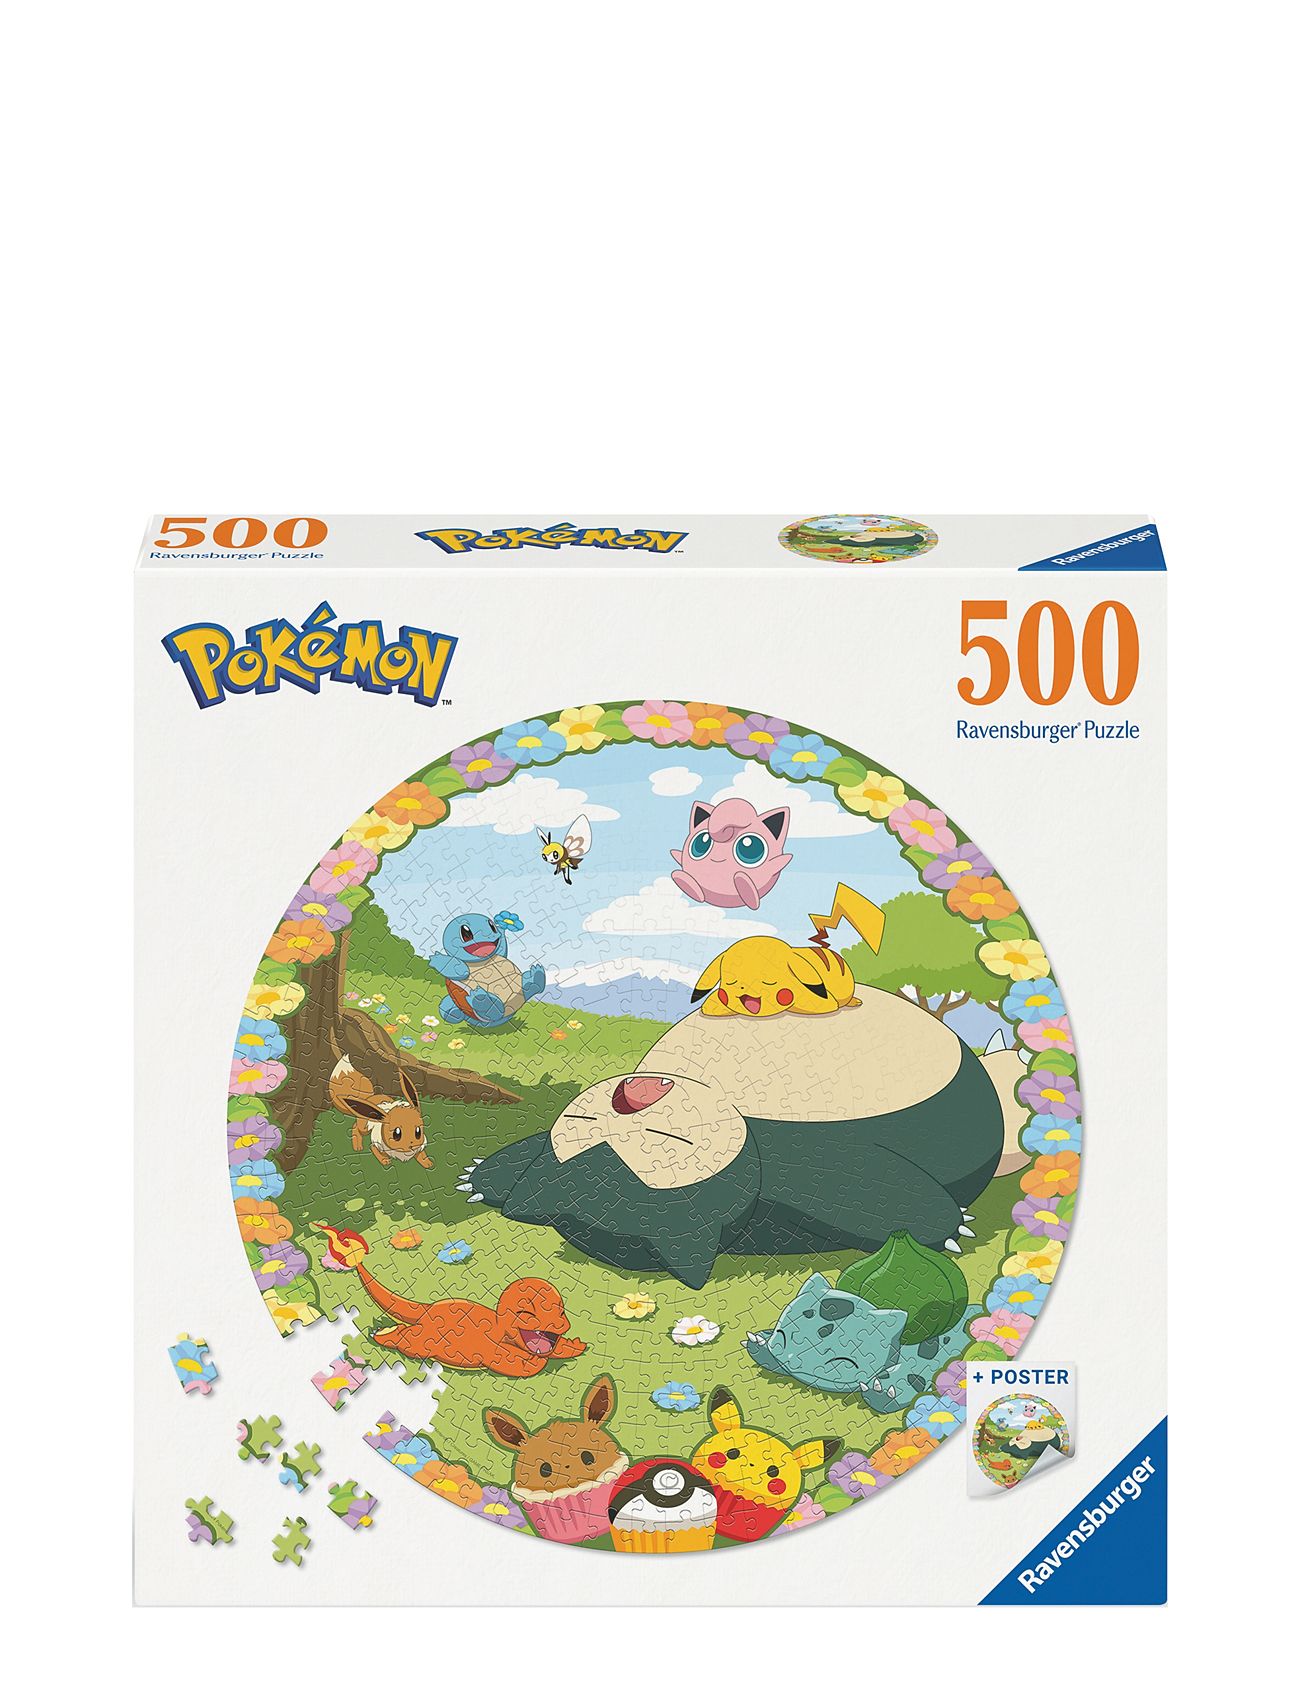 Blooming Pokémon 500P Toys Puzzles And Games Puzzles Classic Puzzles Multi/patterned Ravensburger